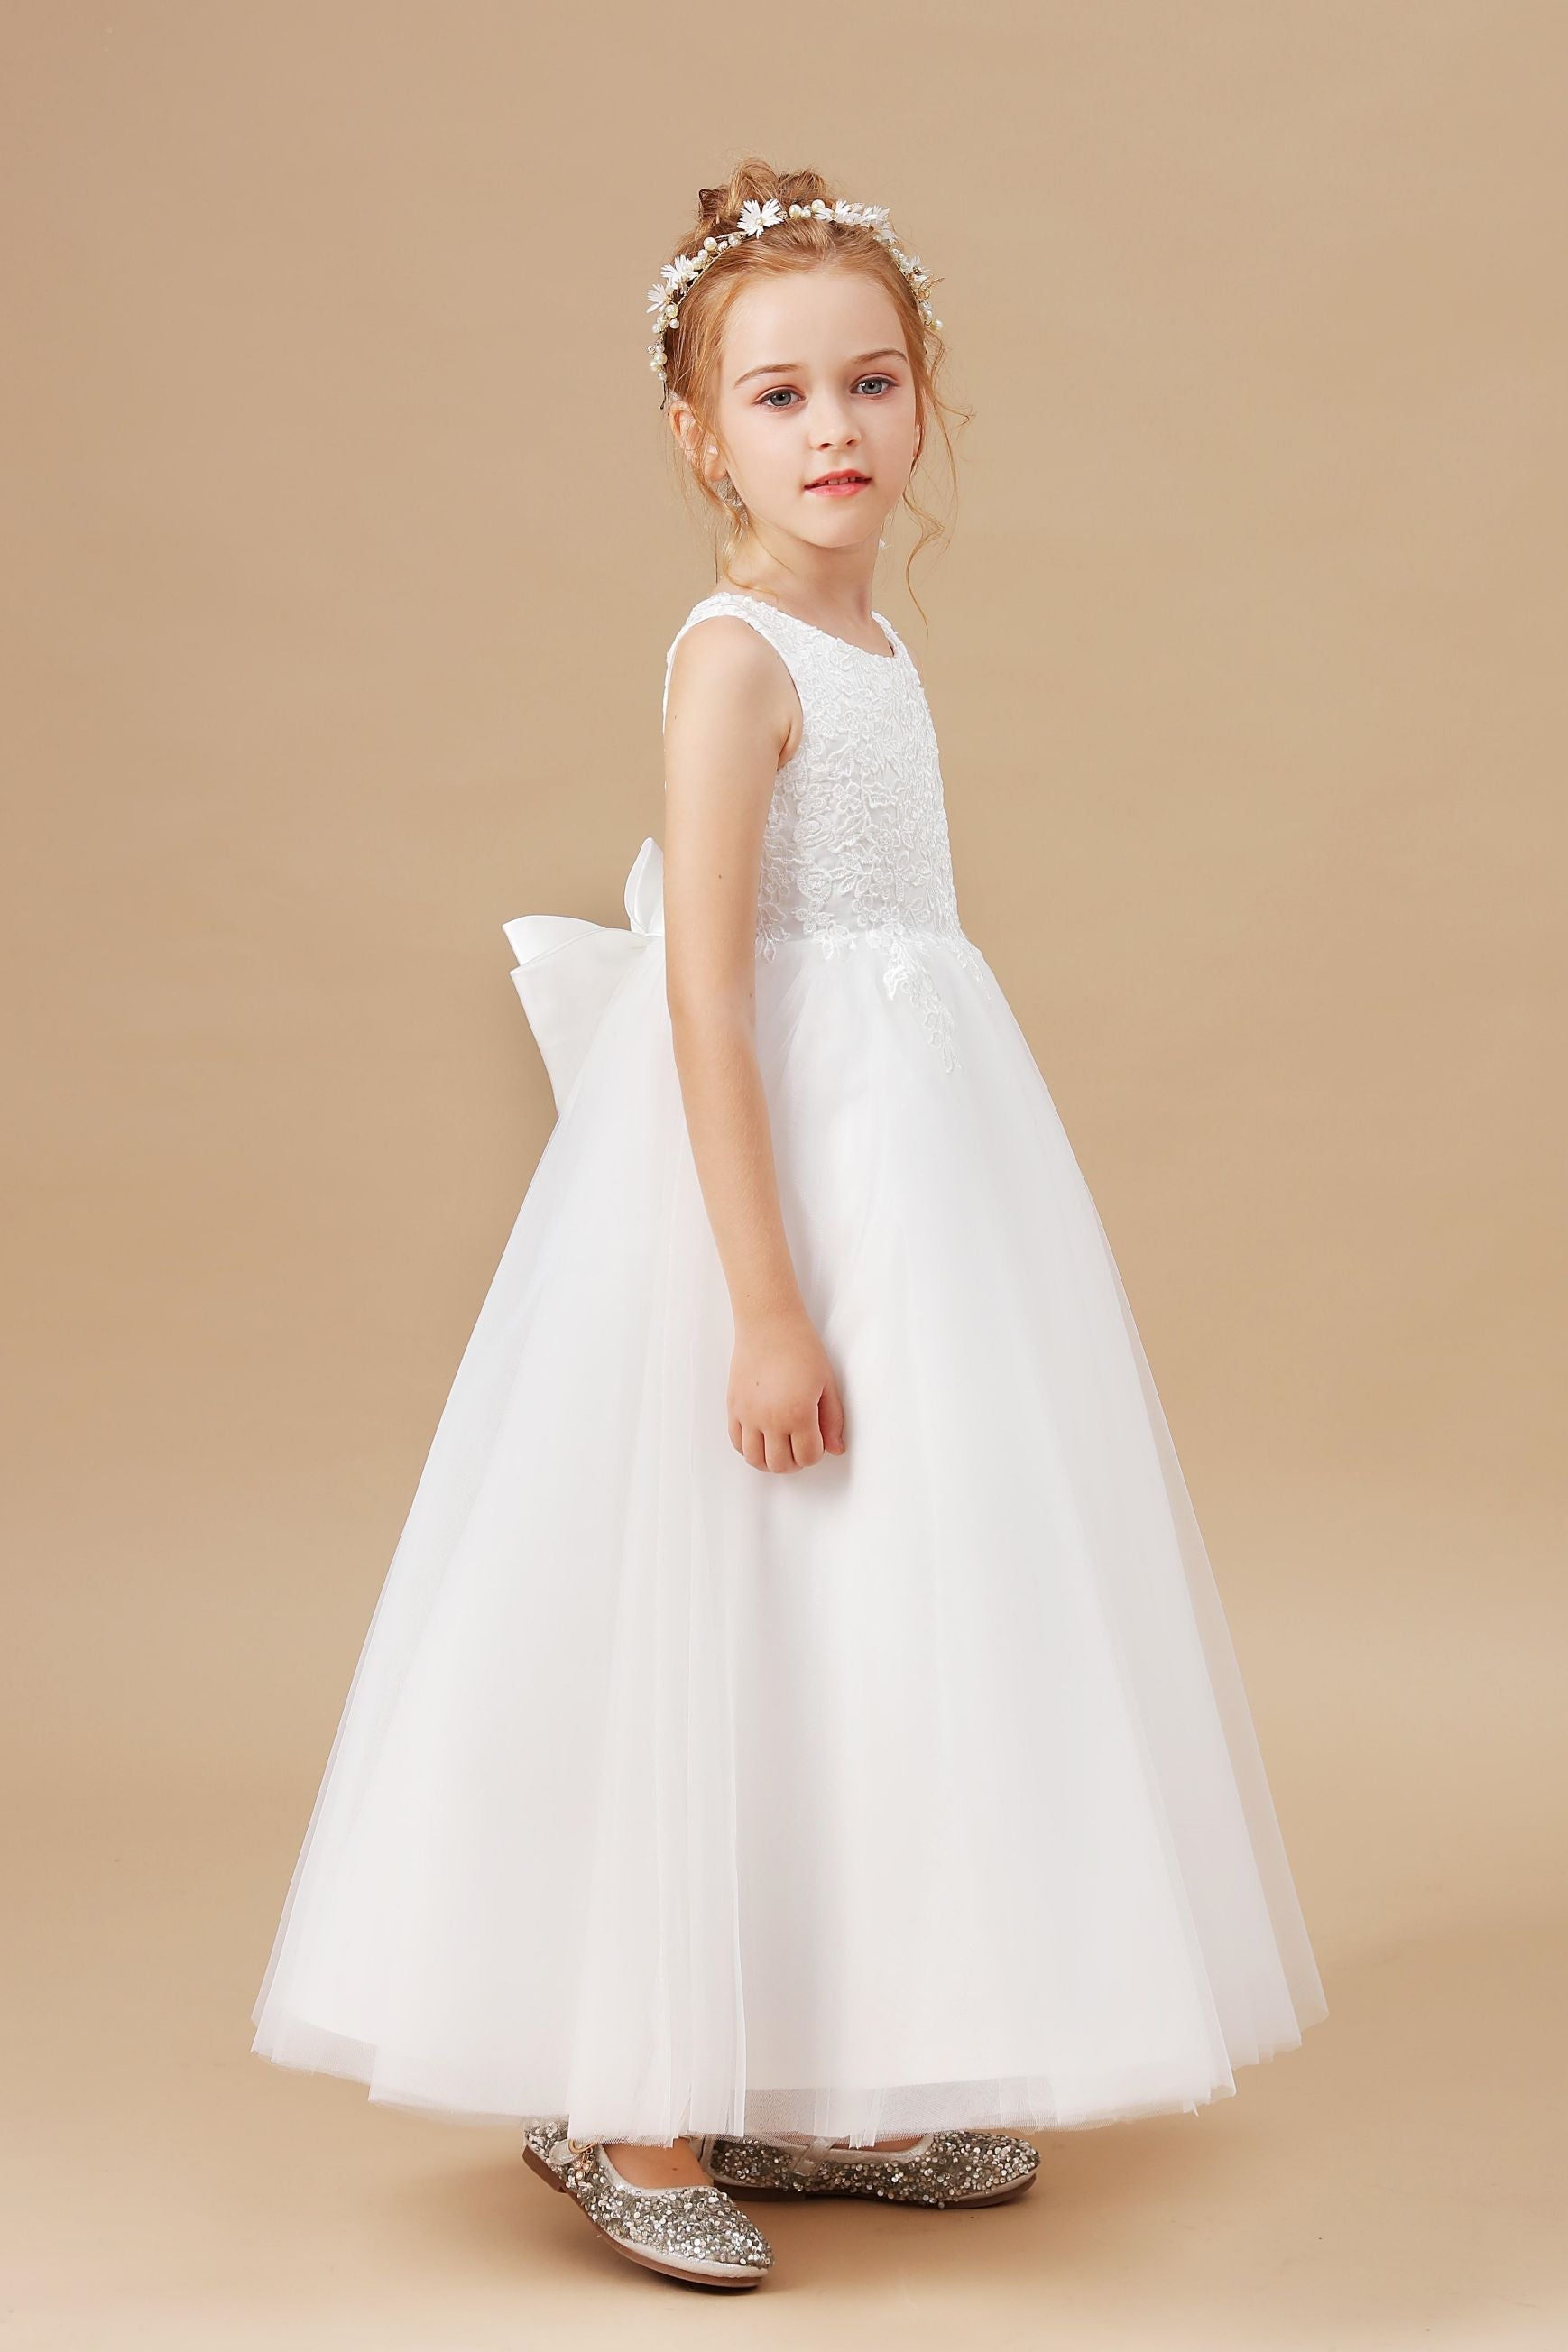 Applique Cute Sleeveless Tulle Flower Girl Dresses With Bownot